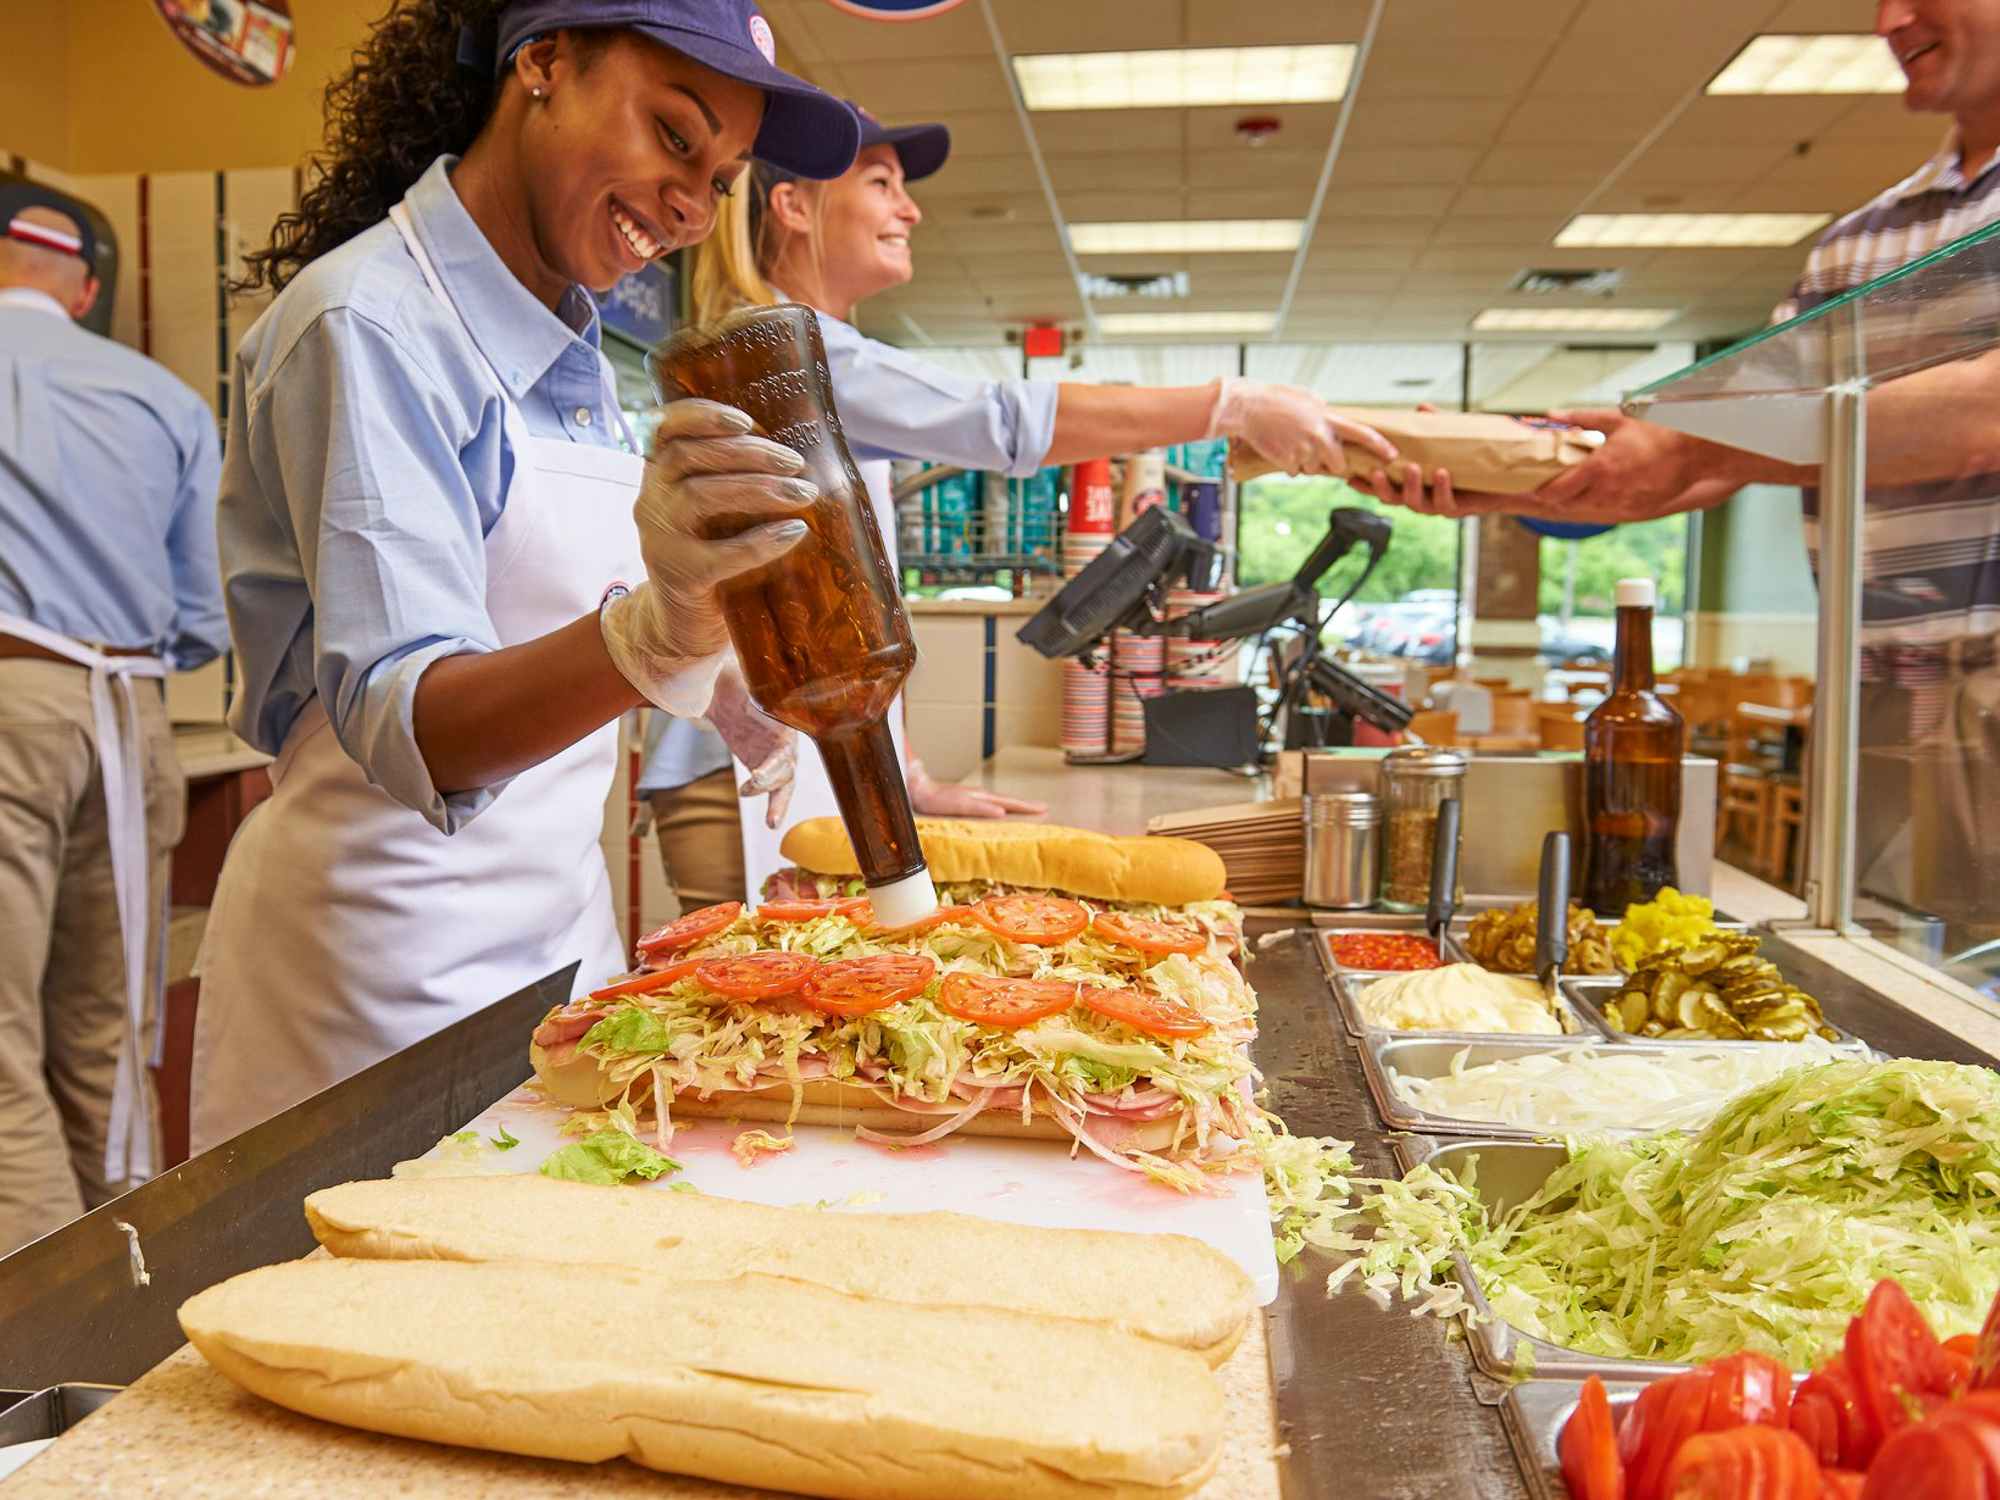 Jersey Mike's employees making subs for customers